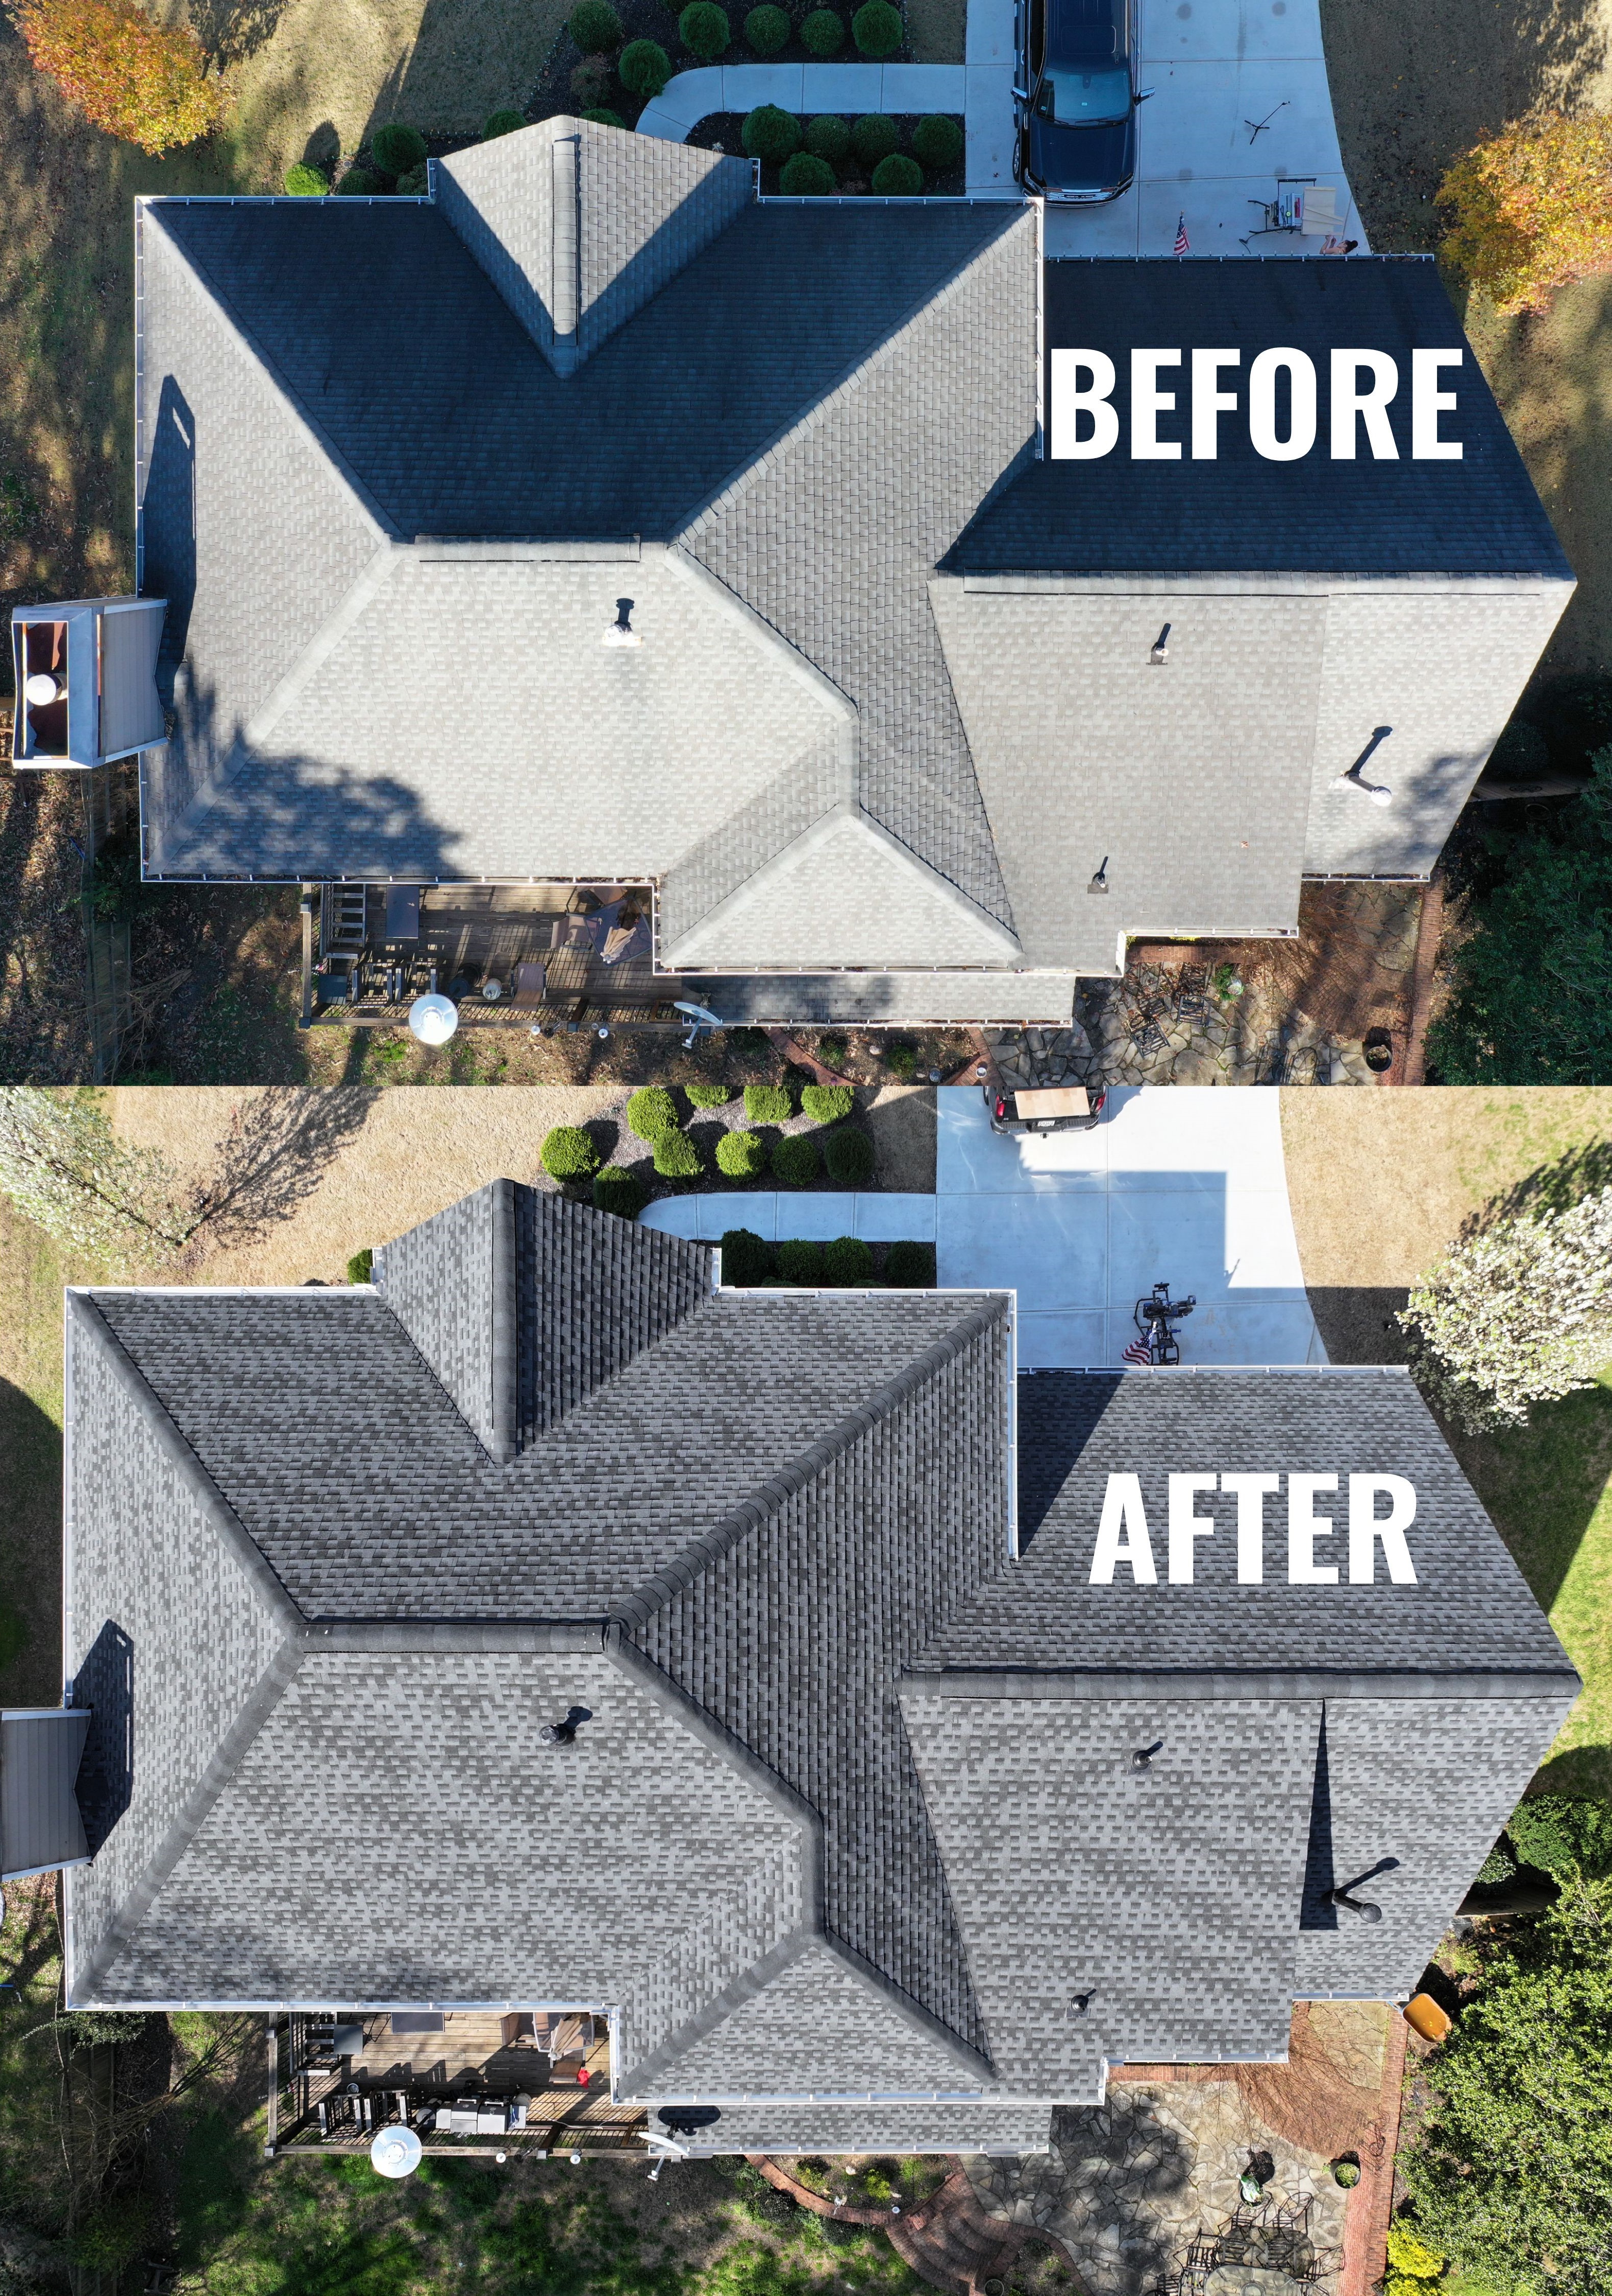 Elite Roofing Systems Transforms Roofing with GAF Timberline HDZ Shingles in Marietta, GA